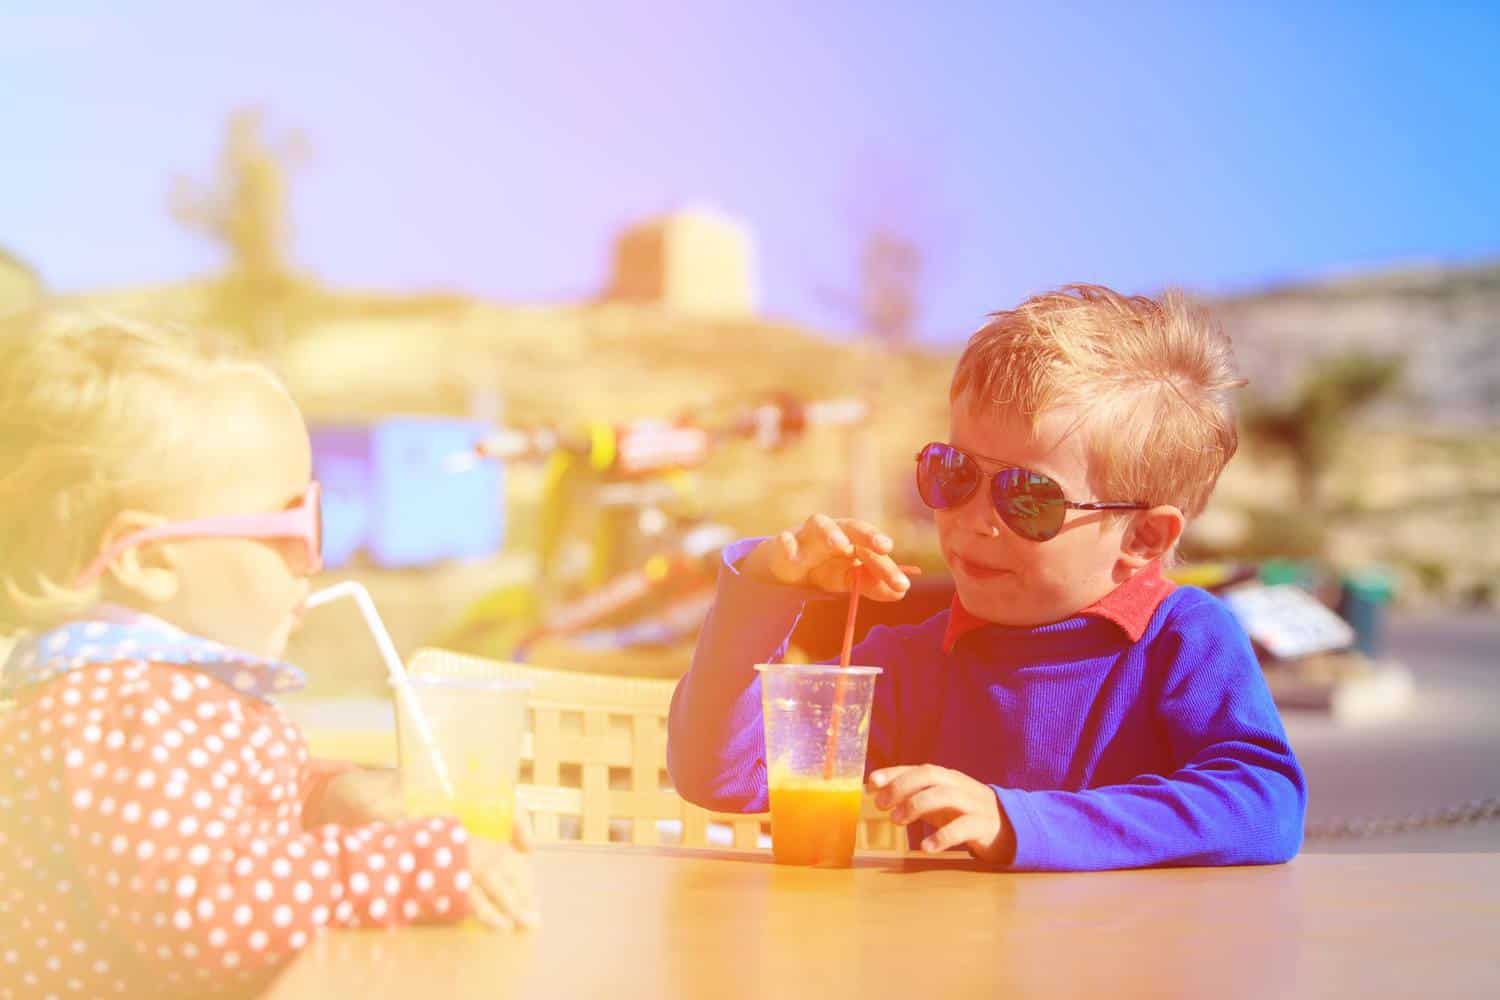 Two young children enjoying drinks at the beach.